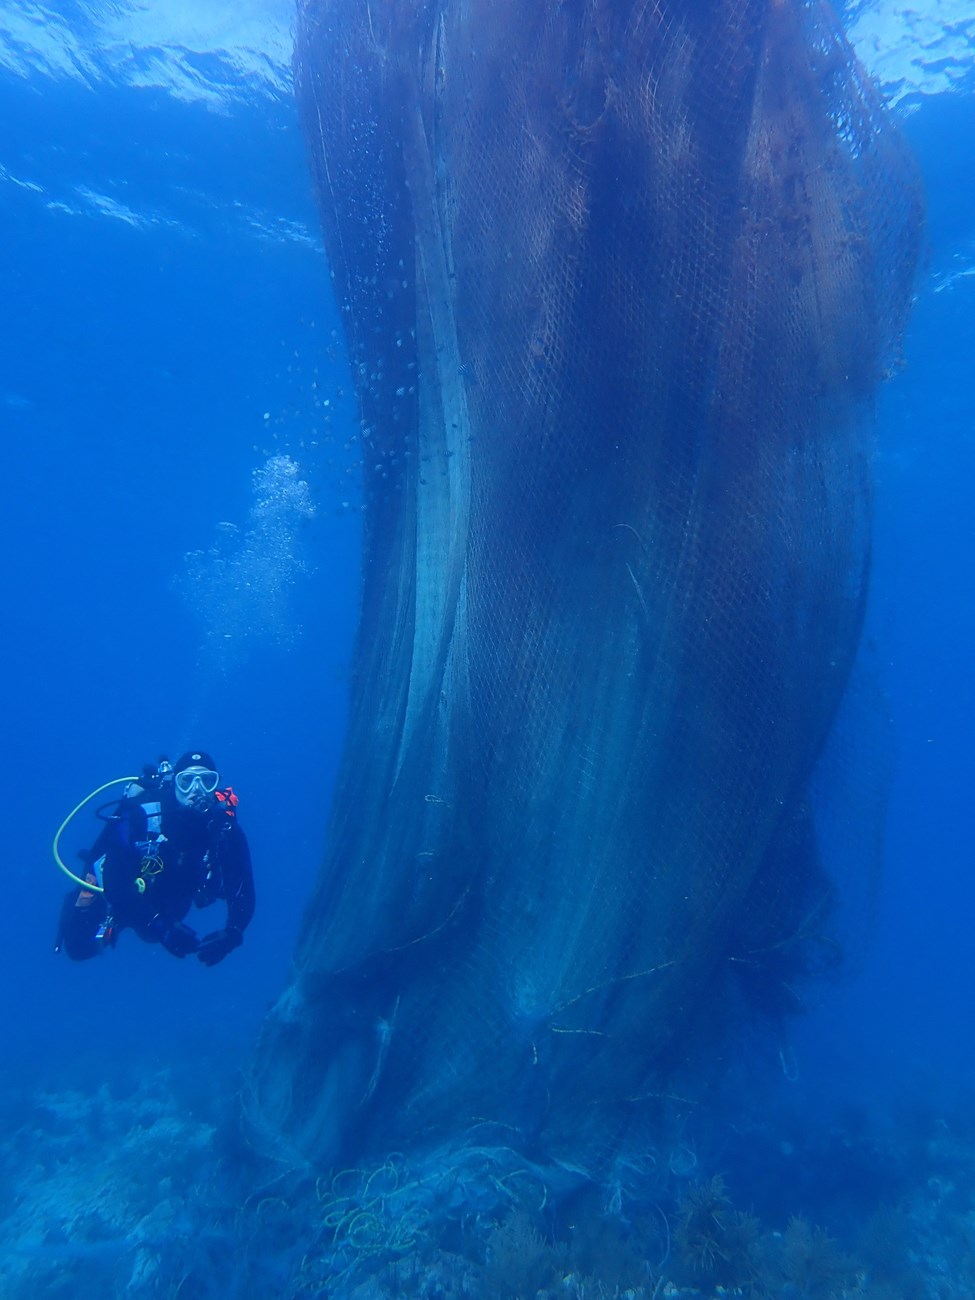 A massive drifting fishing net spans the distance between the ocean surface above to the ocan floor below. A scuba diver dwarfed by the net swims on the left side.